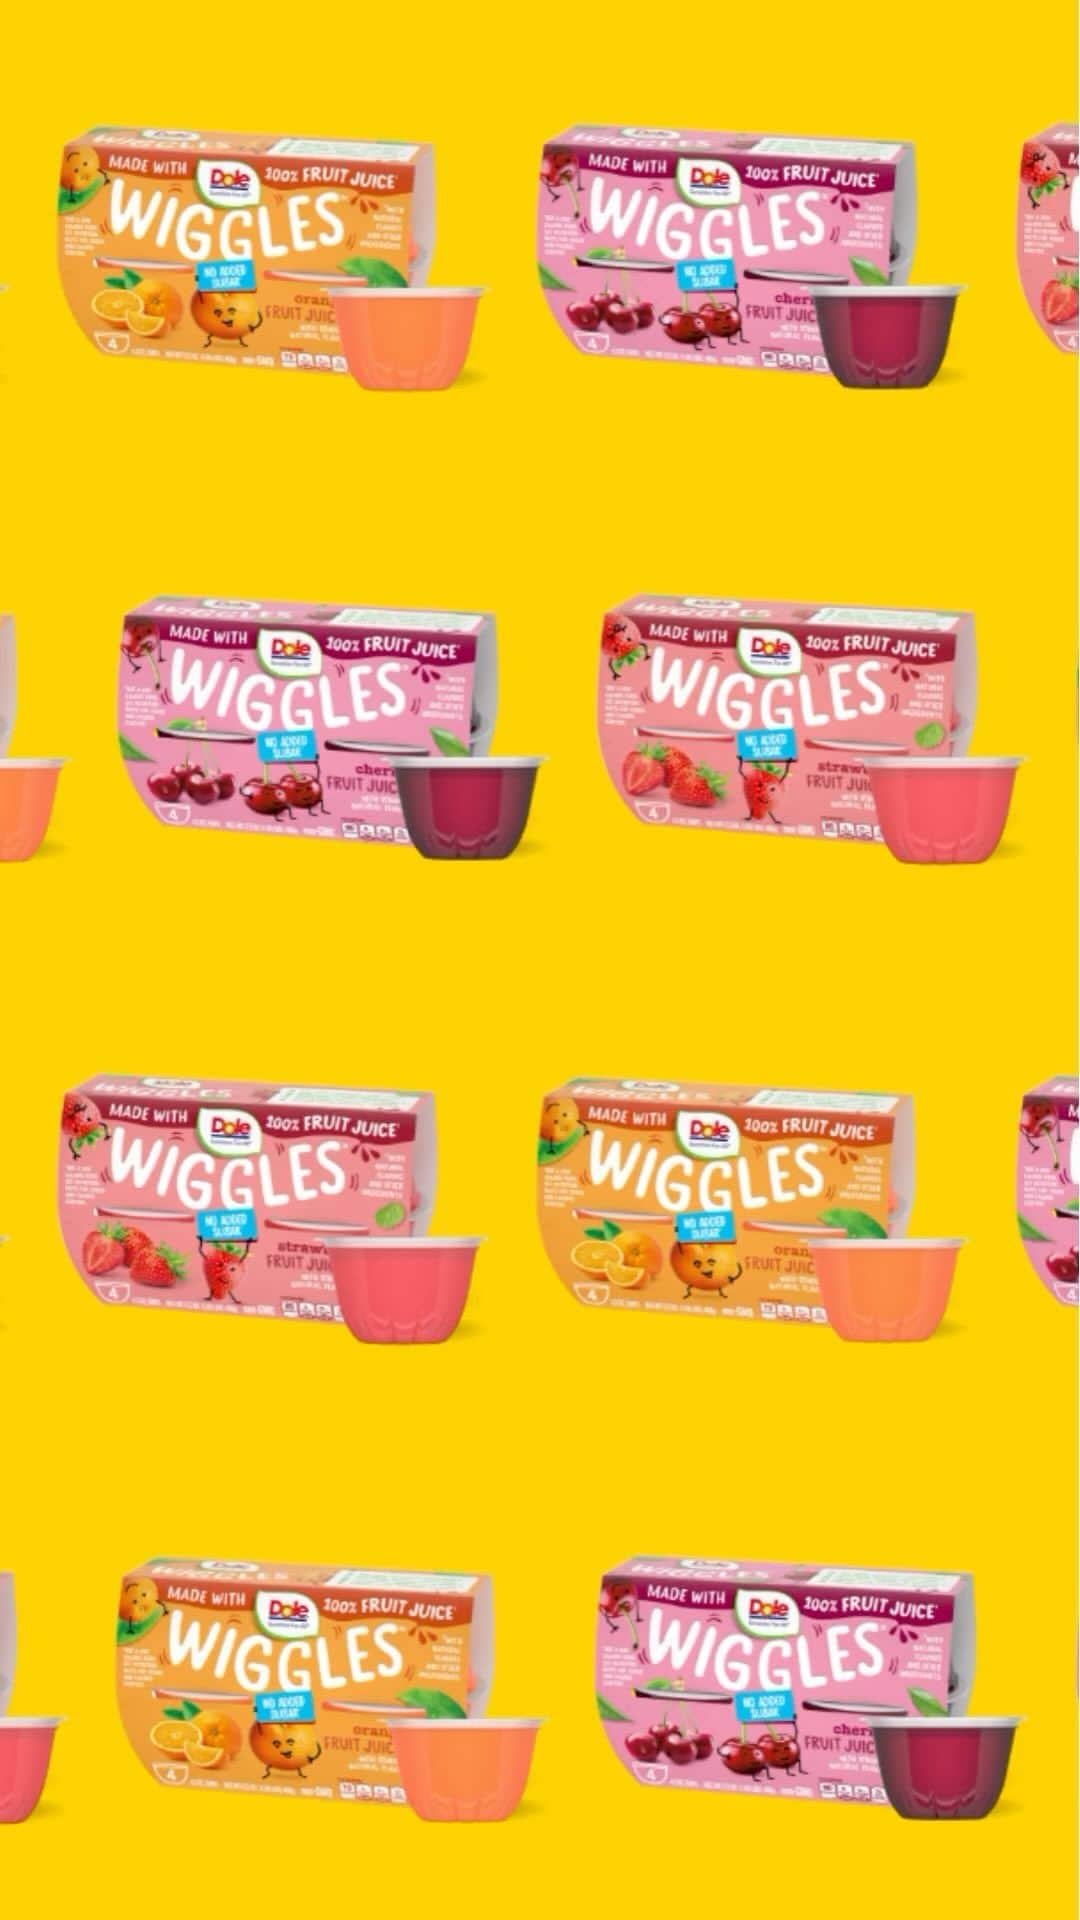 Dole Packaged Foods（ドール）のインスタグラム：「Get ready to wiggle and giggle with the Dole® Wiggles! Dive into a world of fruity fun and delight! 🎉 #DoleWiggles #giggles #fun #DoleSunshine」